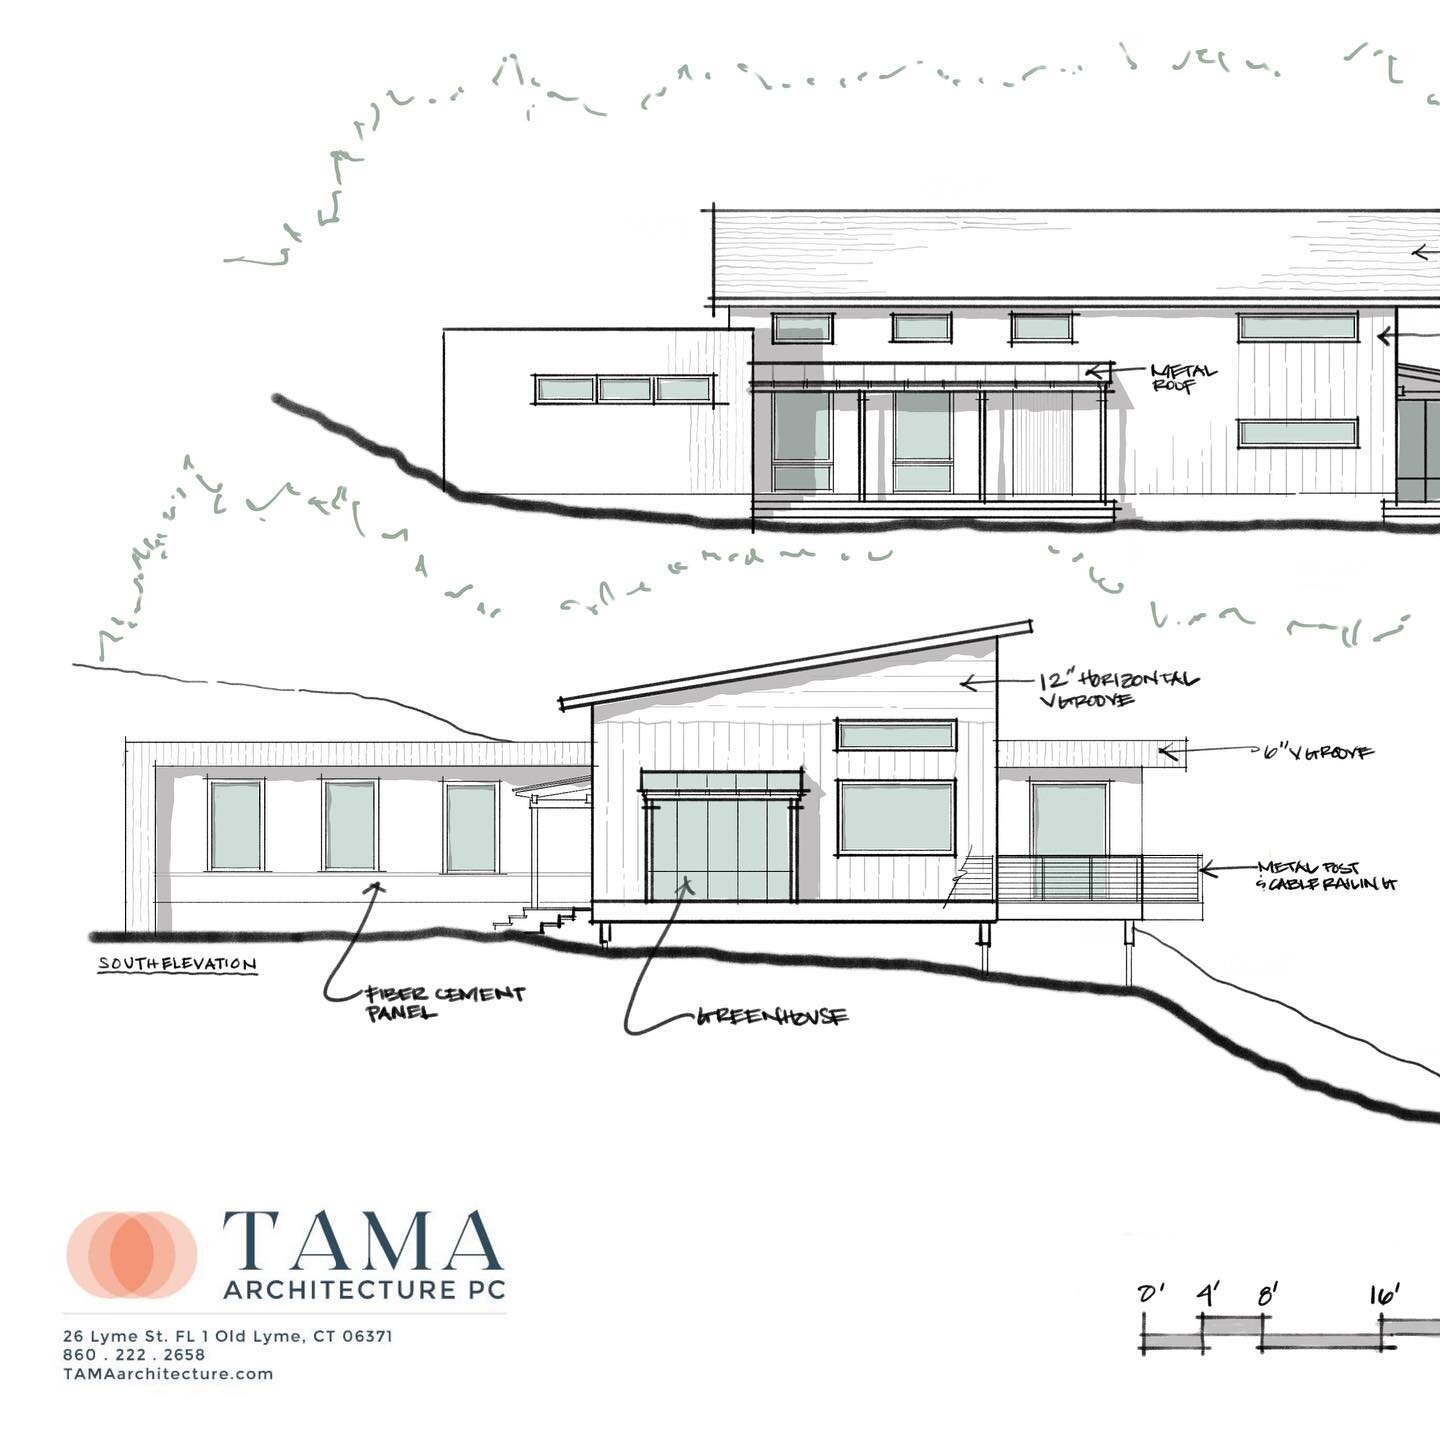 #ontheboards Sketch elevations of a sweet net zero/ passive house home surrounded by woods, blueberry patches, and boulder outcroppings&mdash; so quintessentially Rhode Island!  More to come on this lovely home, for a lovely young family! #maythe4thb